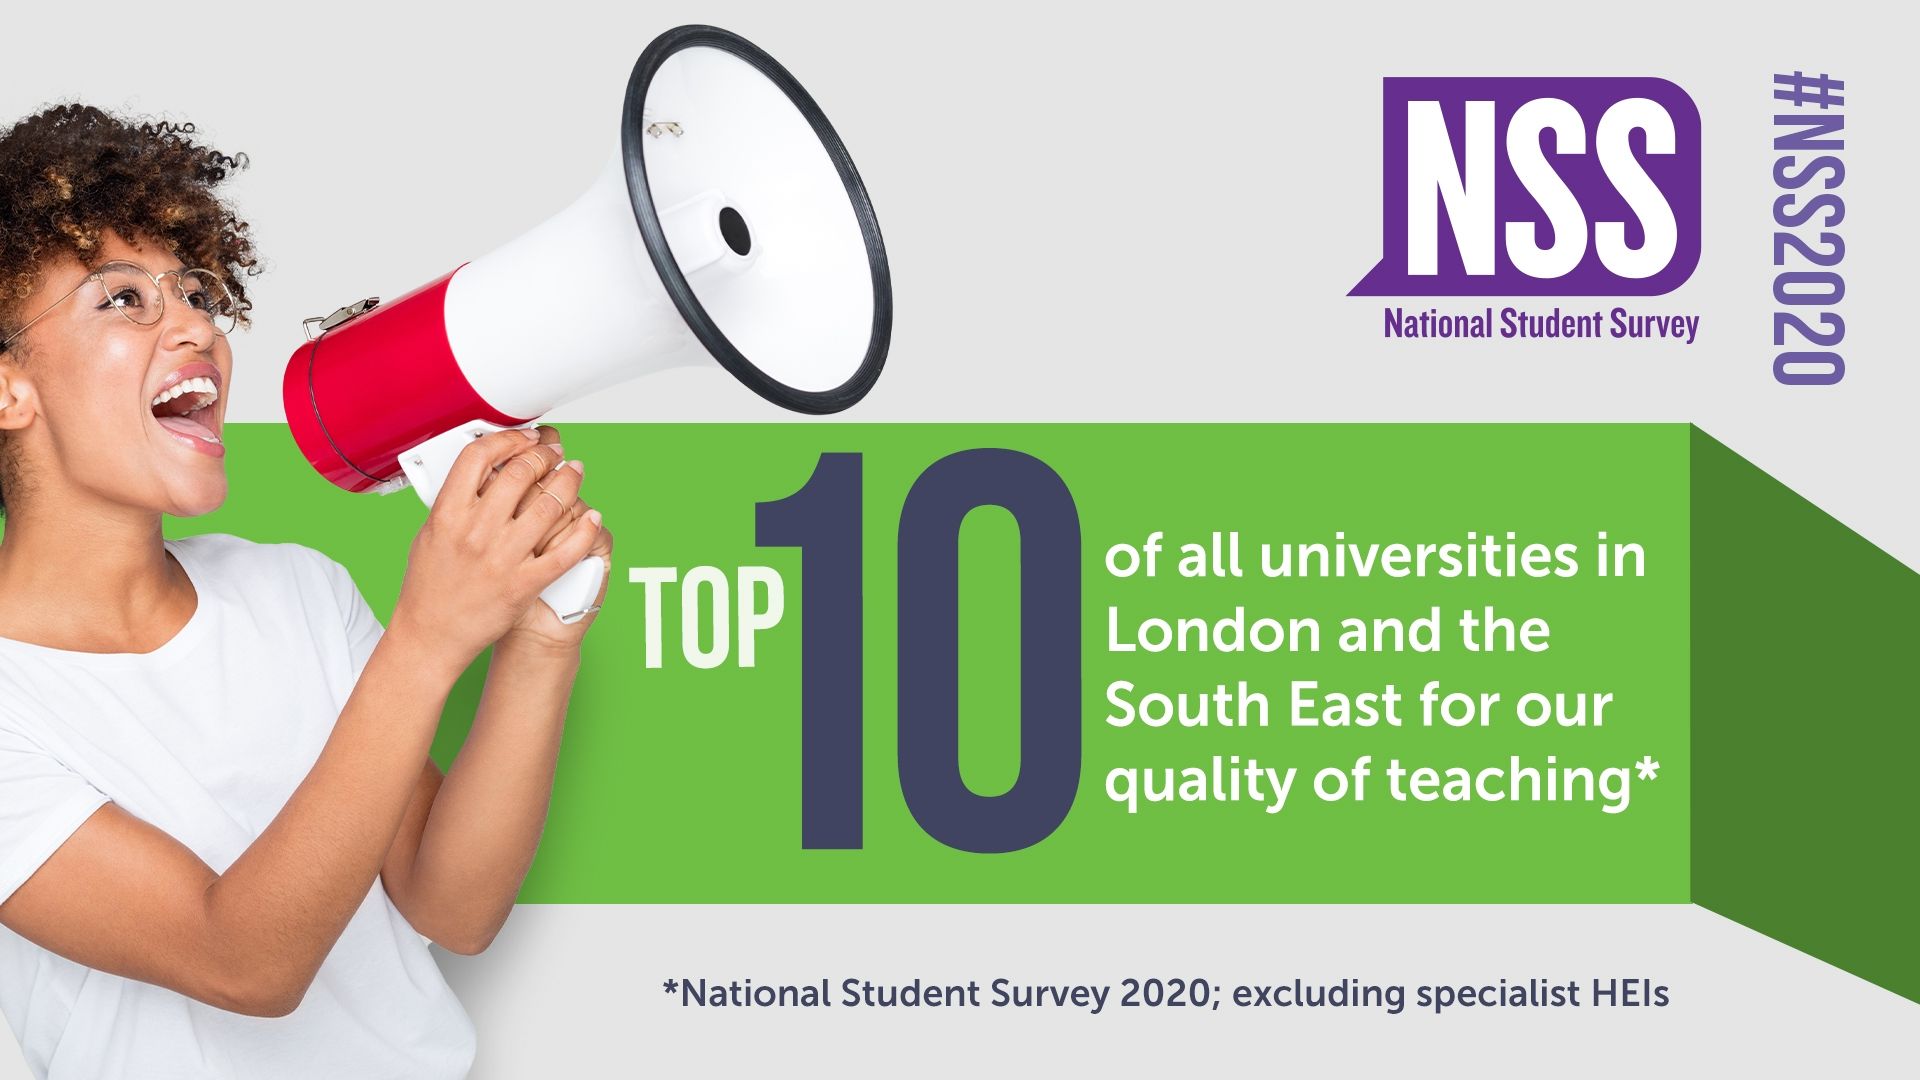 Top 10 of all universities in London for quality teaching